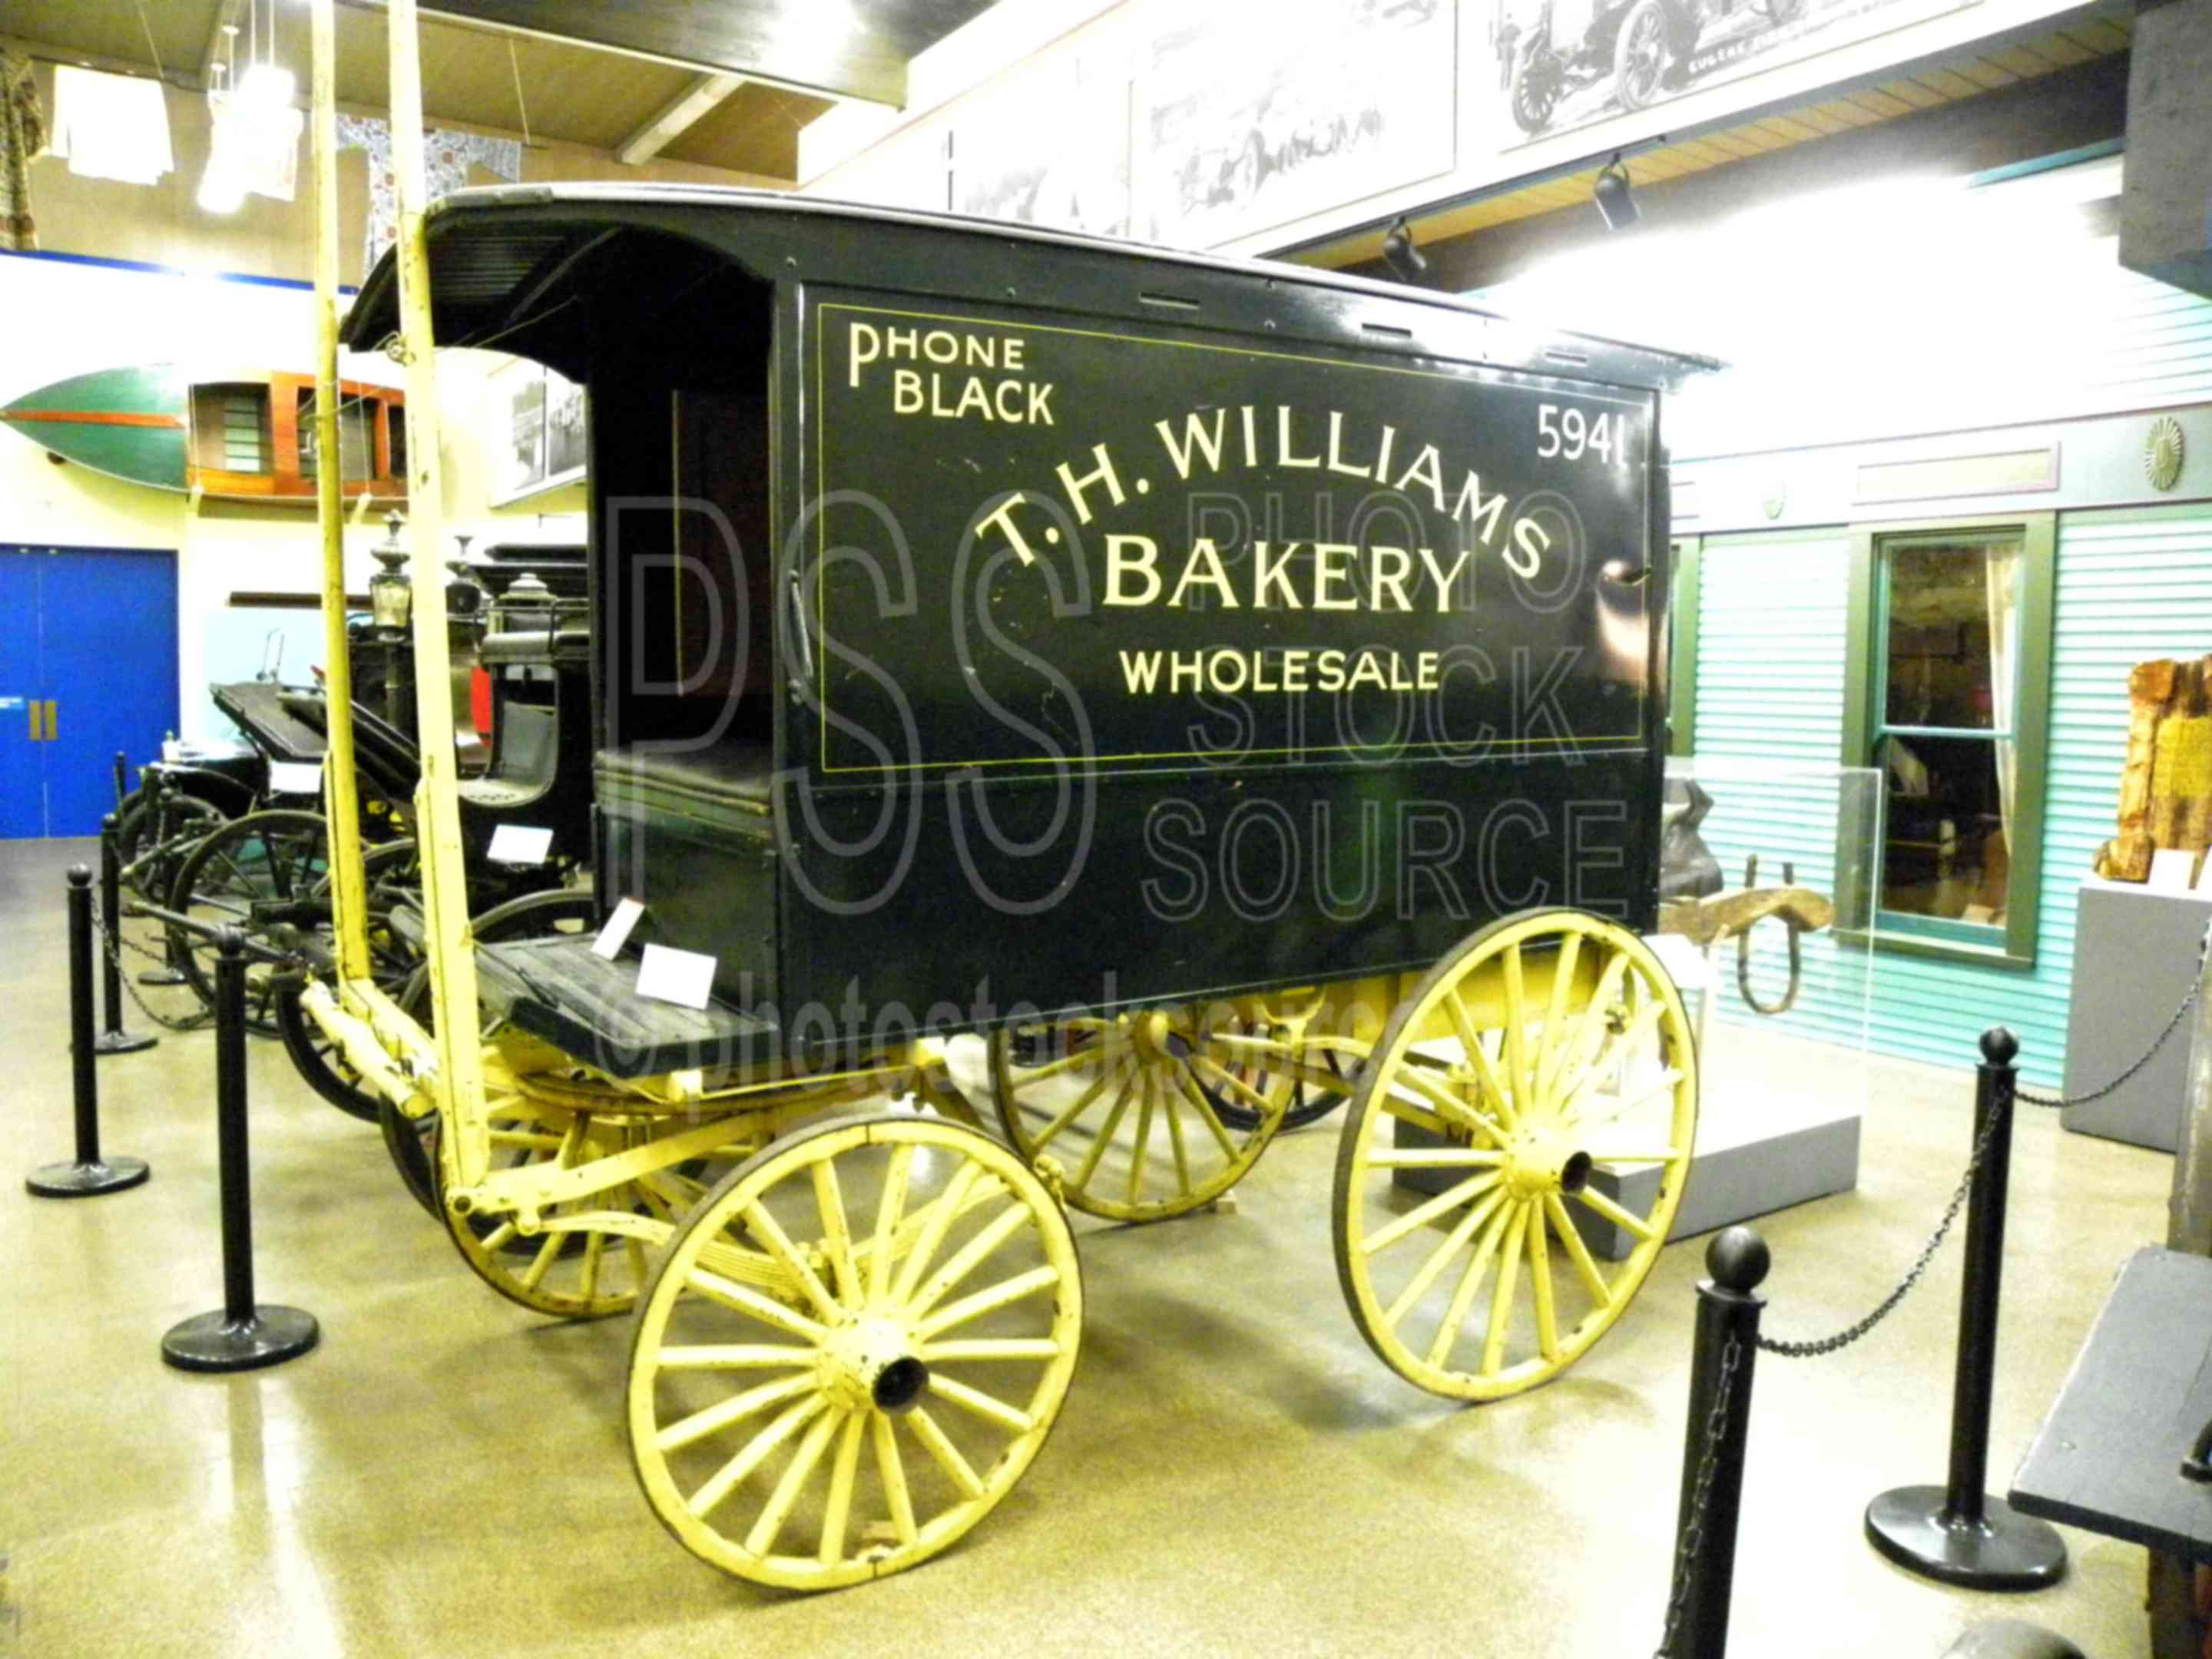 William's Bakery Wagon,history,historical,bakery,williams bread,delivery,wagon,wheels,museum,pioneer